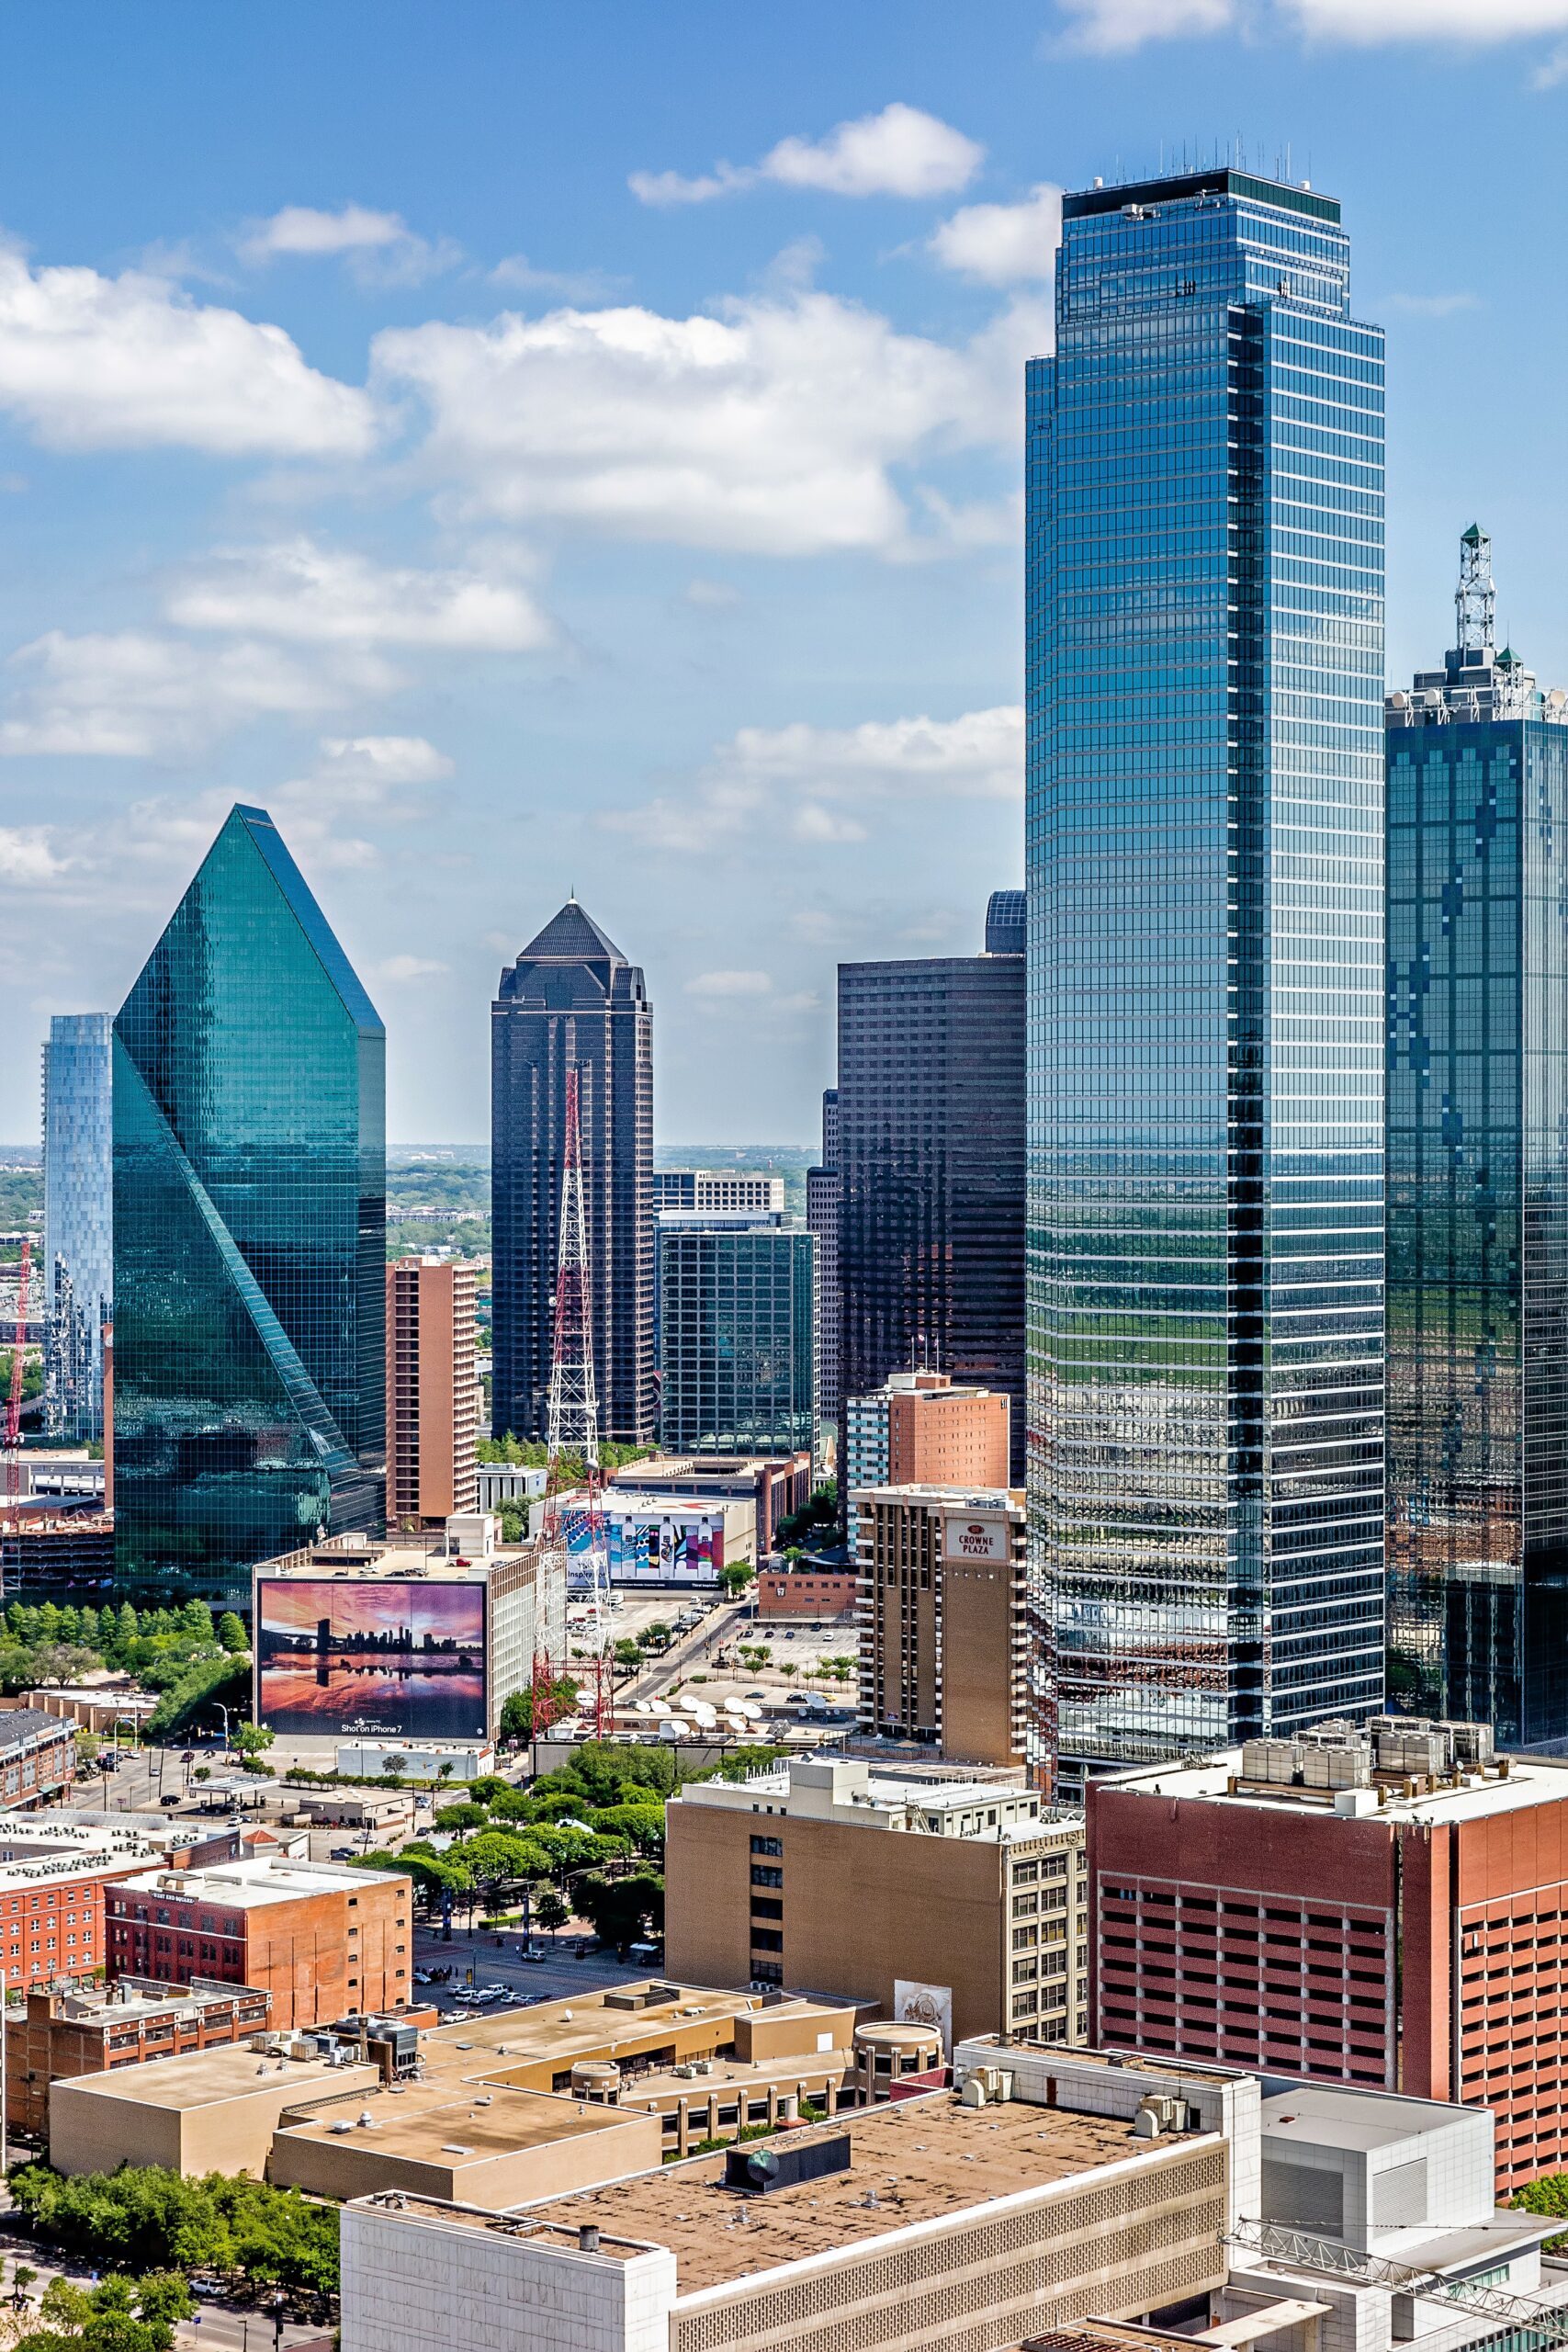 Make the most of a weekend in Dallas, Texas, and find out where to eat, where to stay, and things to do in Dallas.